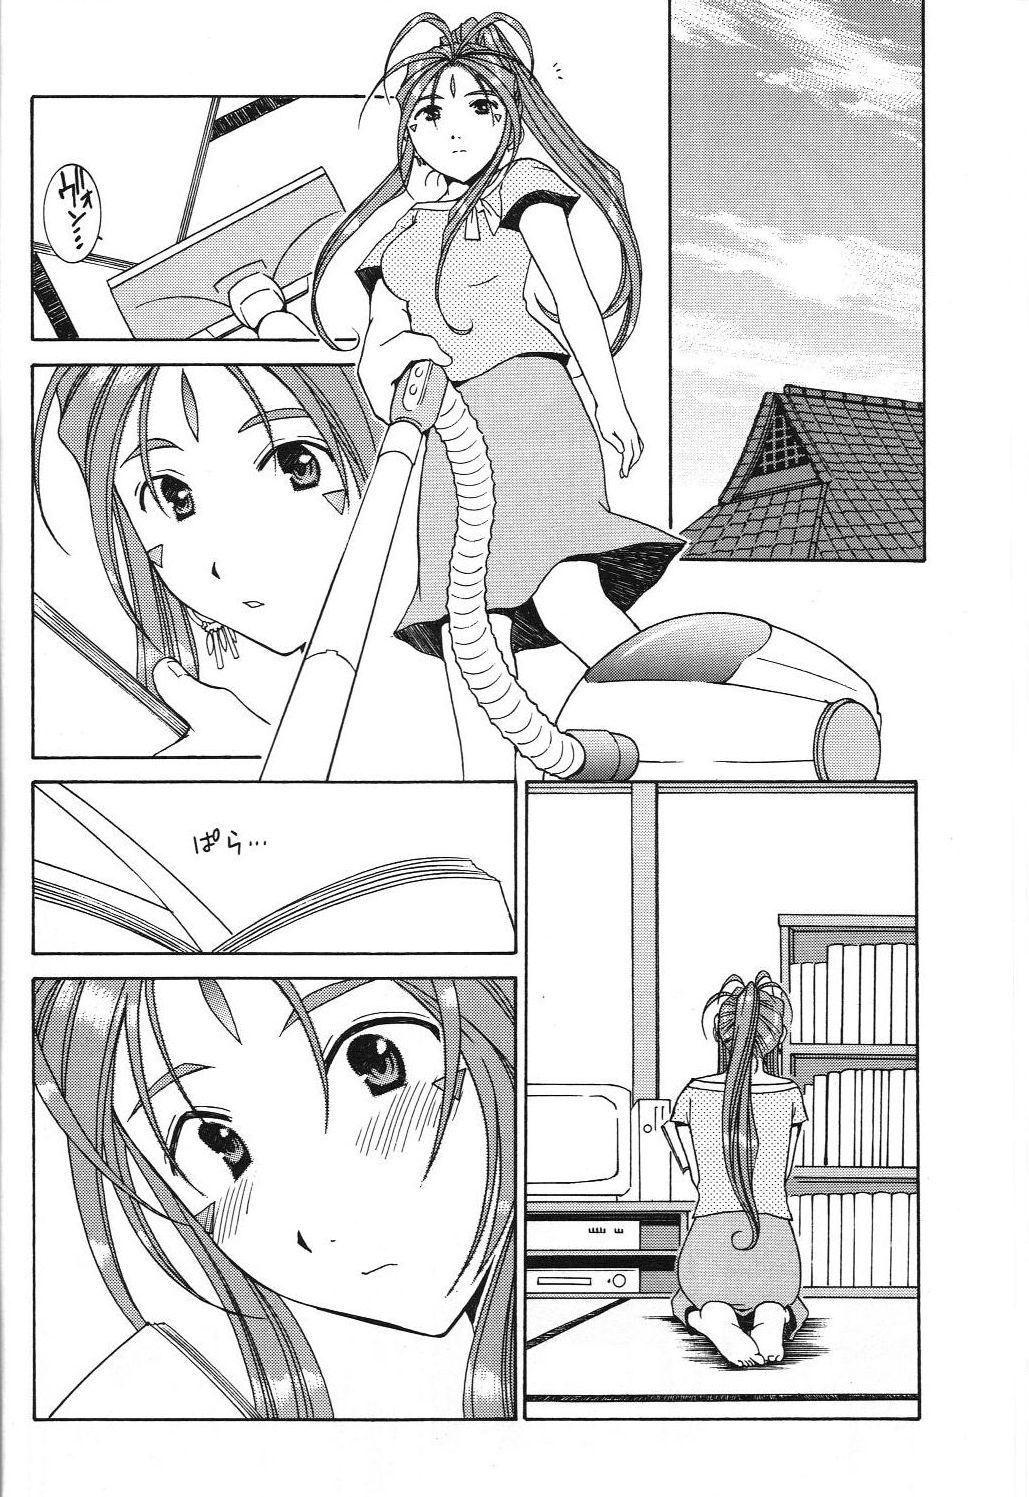 Sexy Girl as night follows day 5 - Ah my goddess Lolicon - Page 11